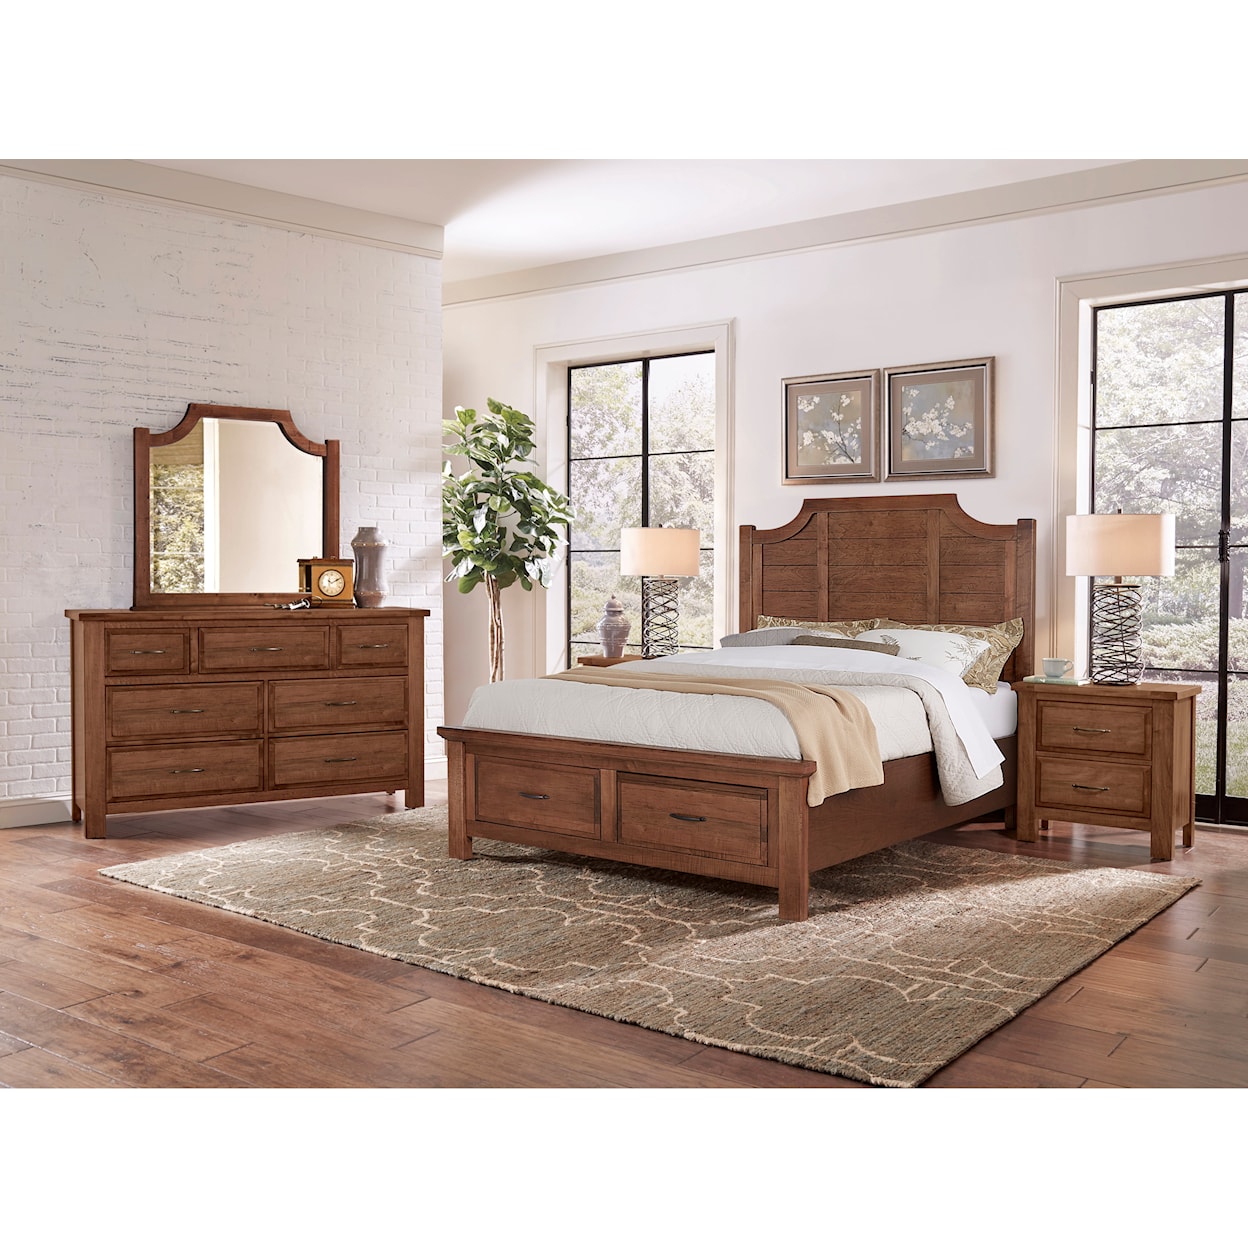 Virginia House Mt Airy King Scalloped Storage Bed